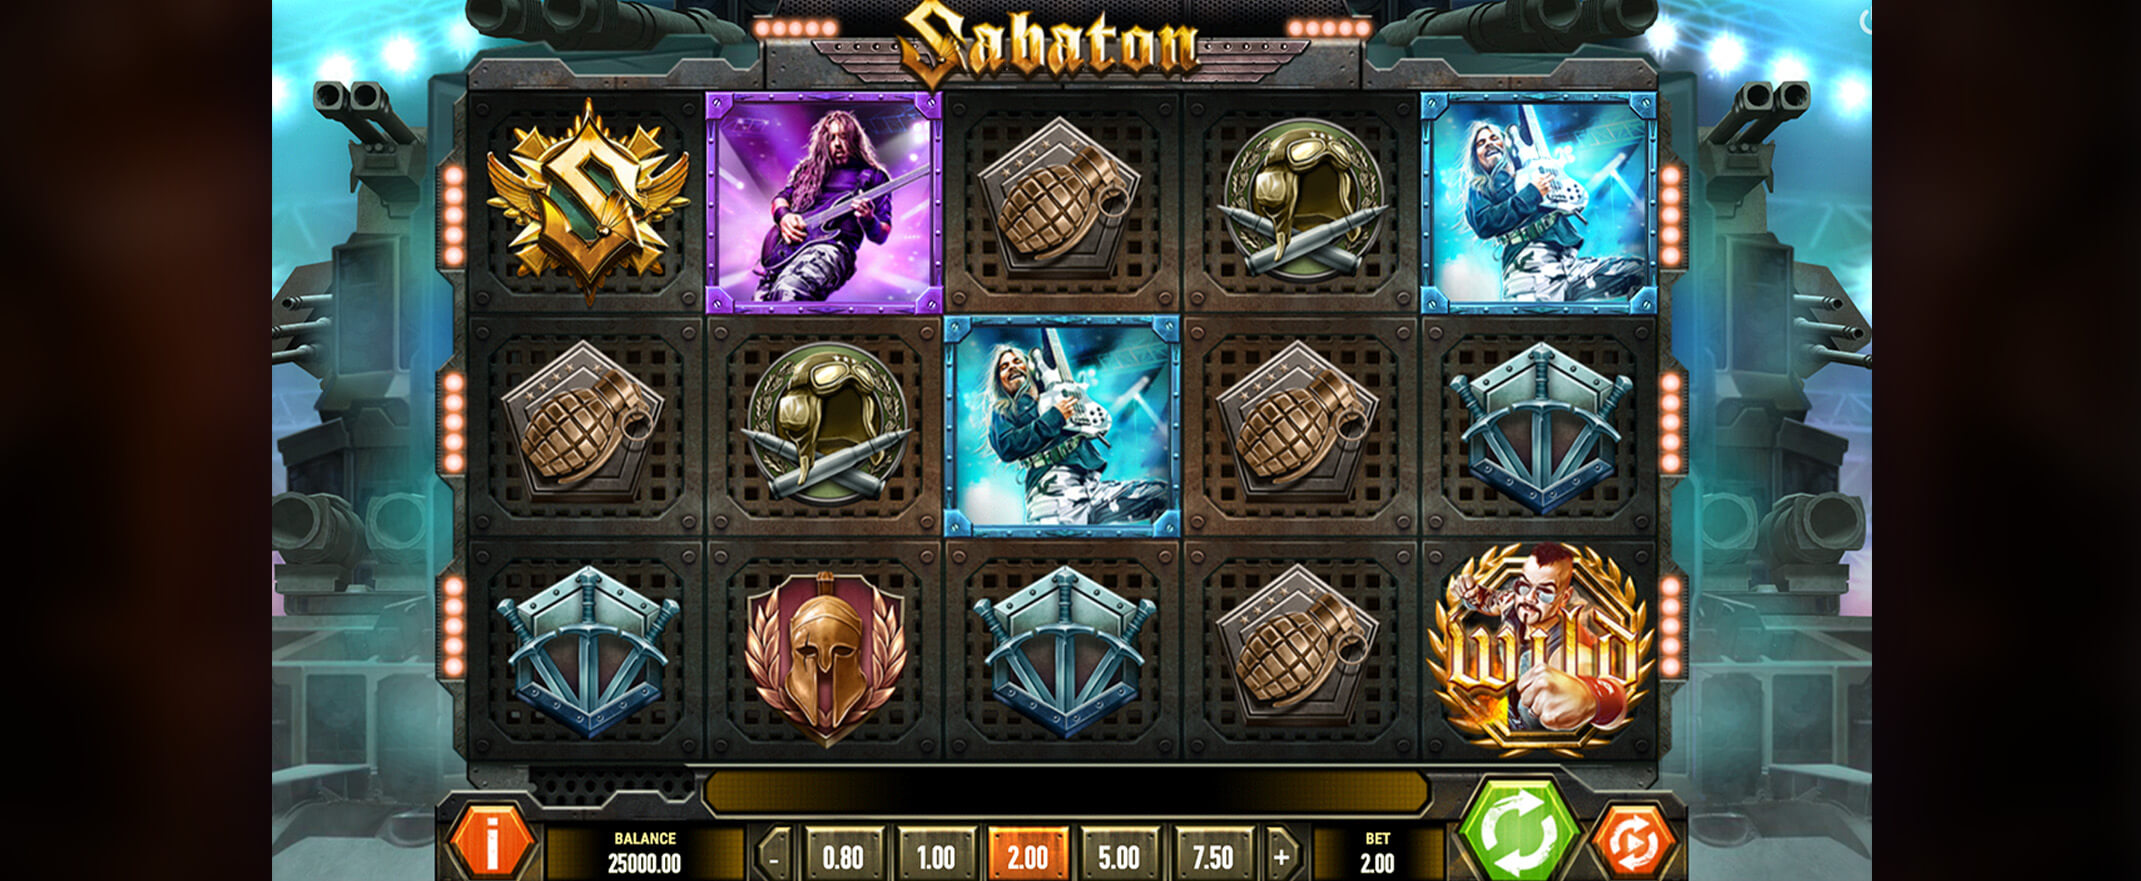 Sabaton video slot from Play'n Go